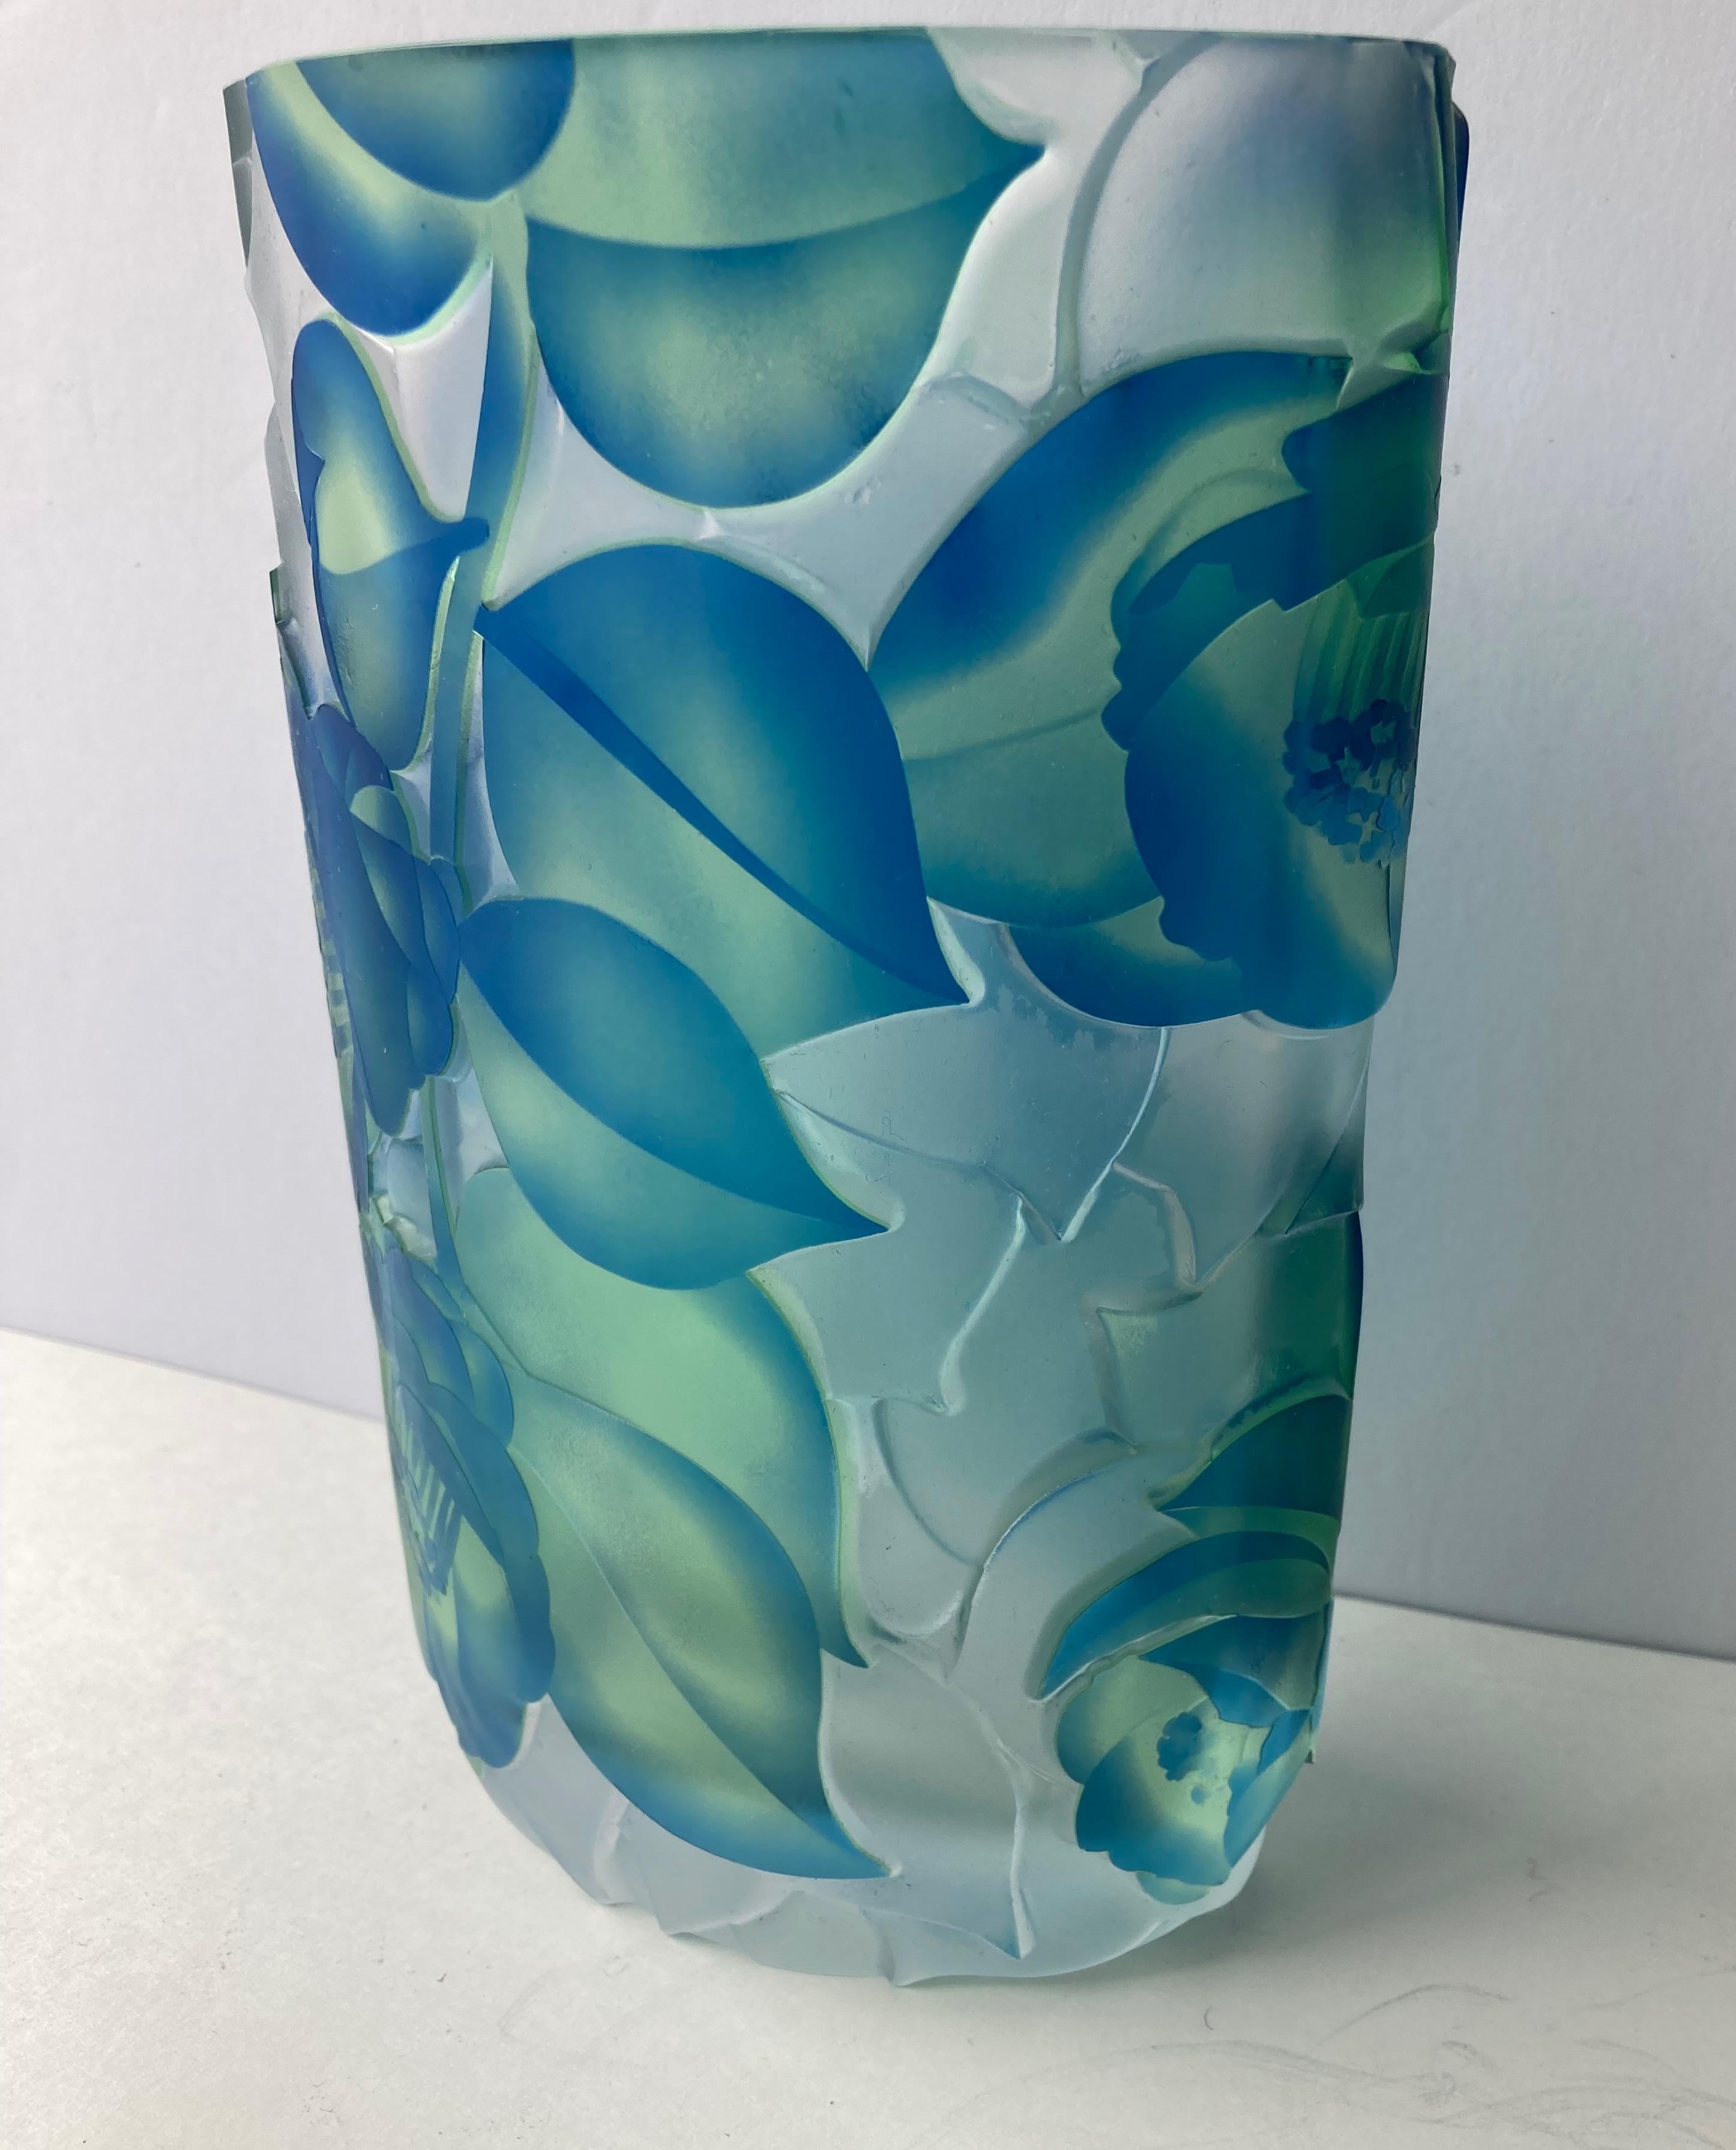 Amazing heavy cut work in this beautiful Moser vase. Sand blasted signature in bottom and plastic label in front. Moser. Czech Republic. Nice glossy and satin finish.